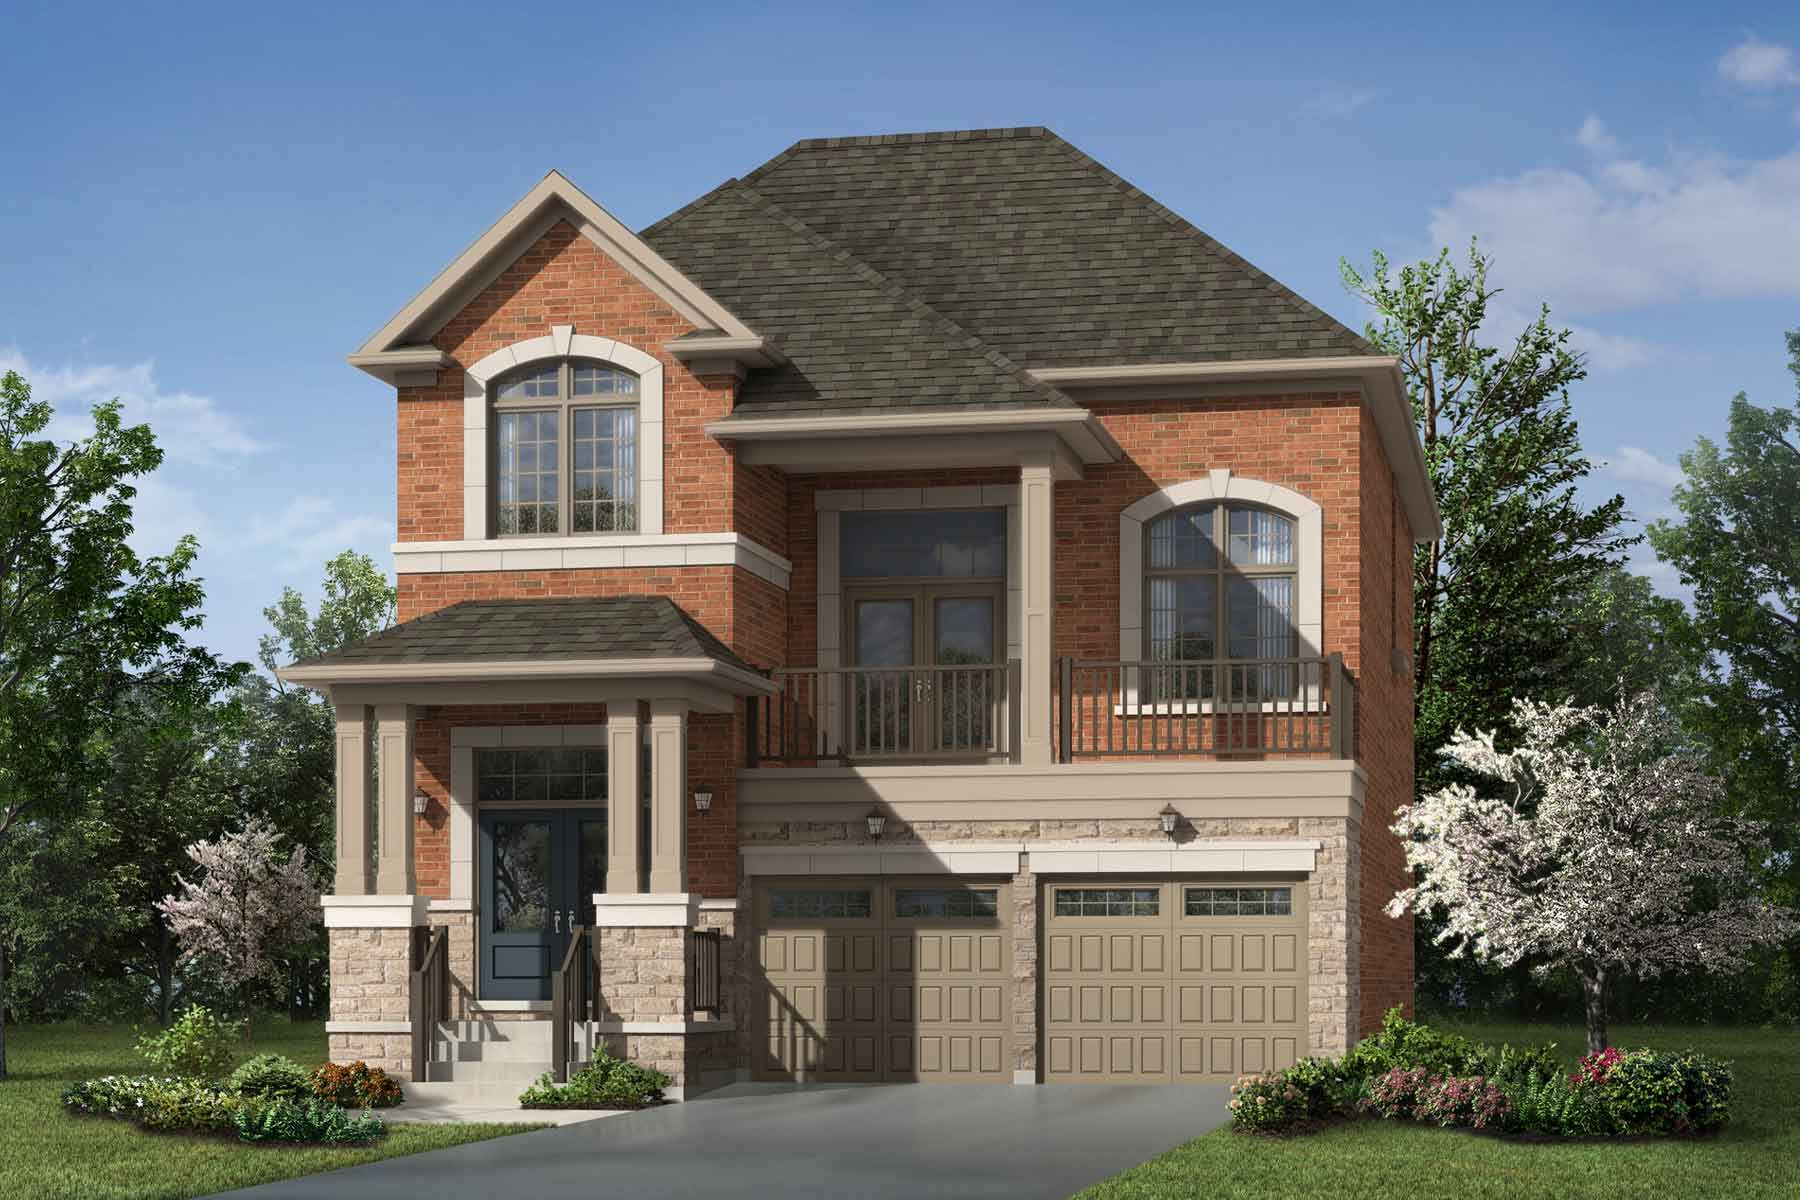 A Traditional style single family home with a double car garage.